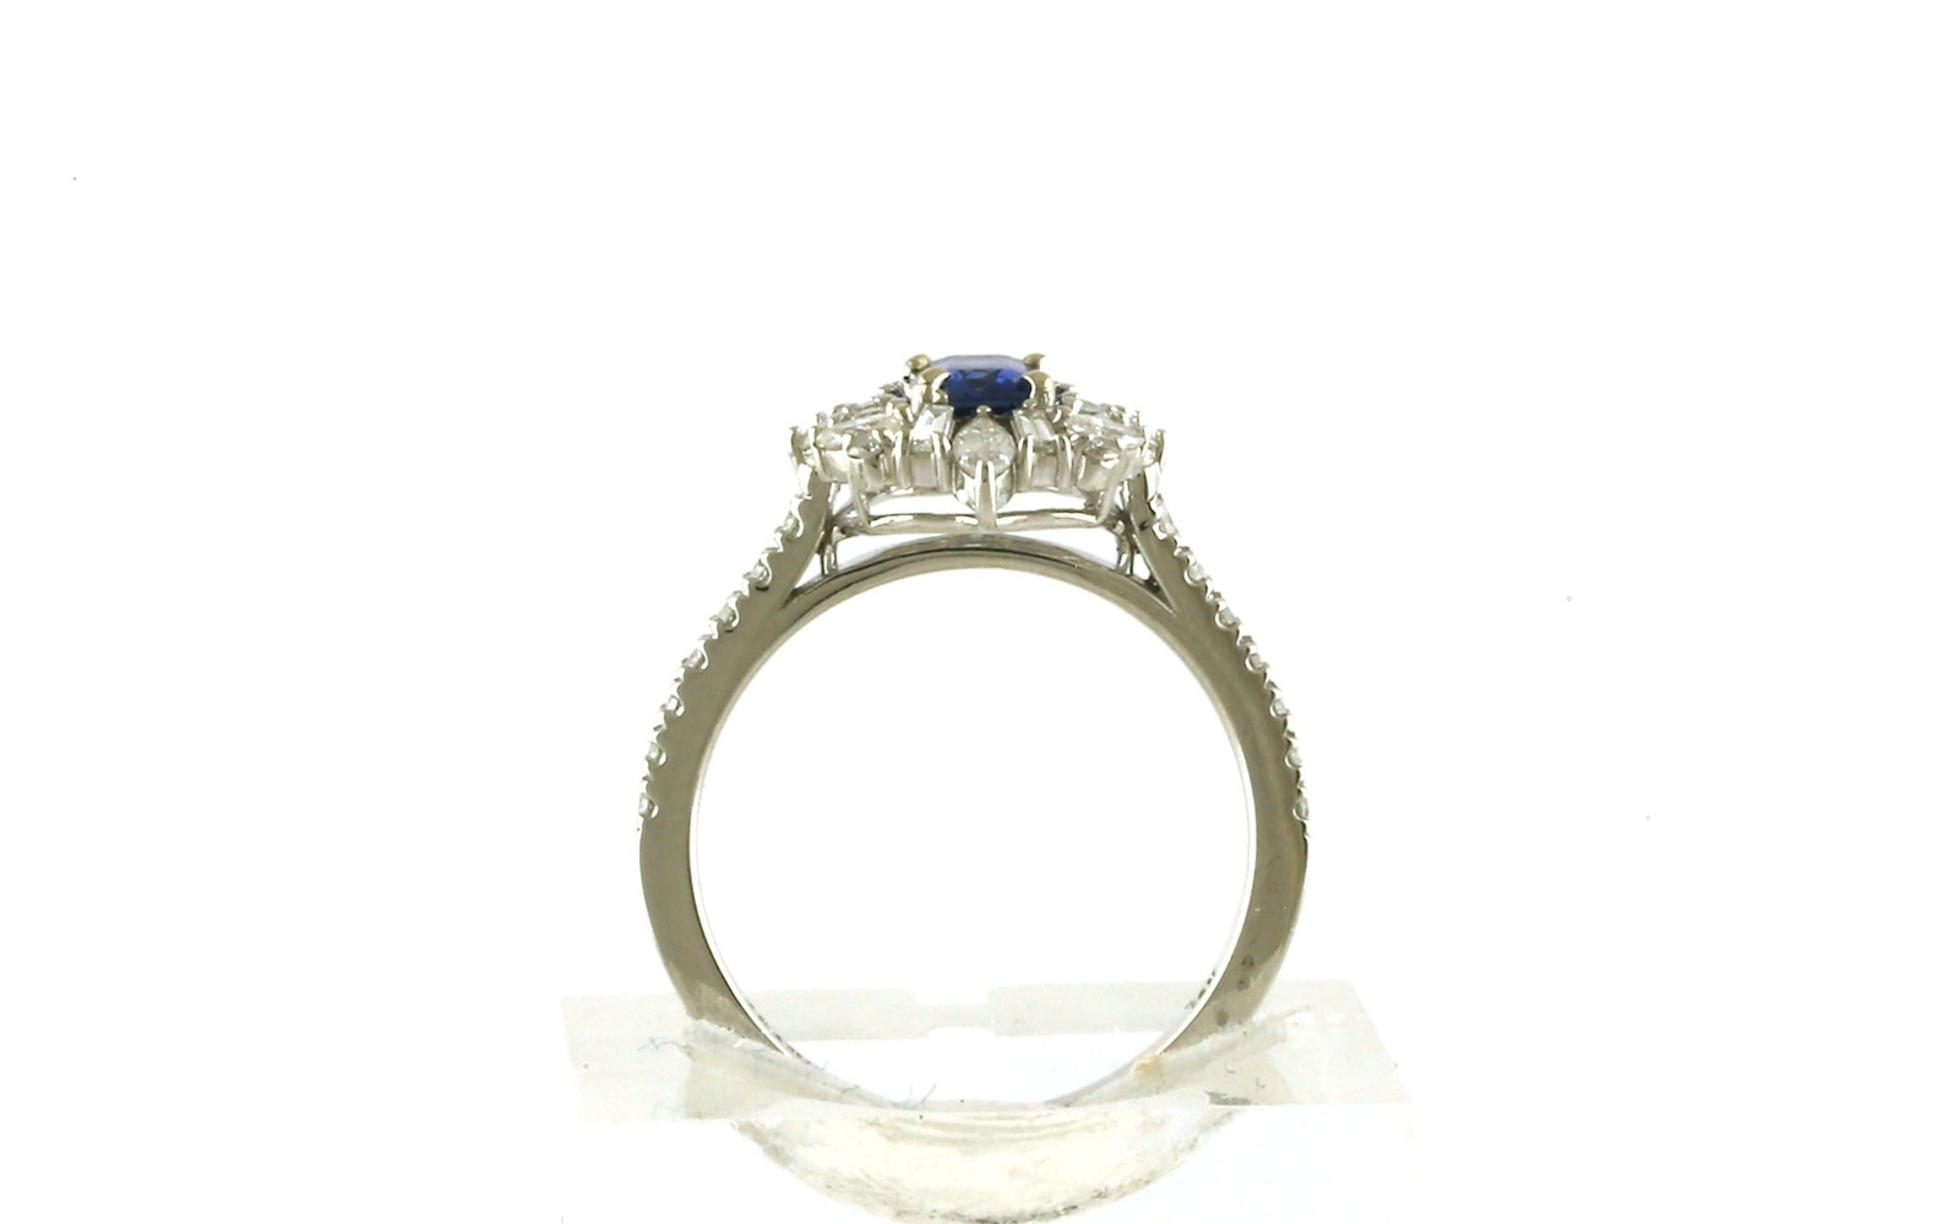 Montana Yogo Sapphire Ring with Cluster Diamond Halo in White Gold (1.16cts TWT) Side View